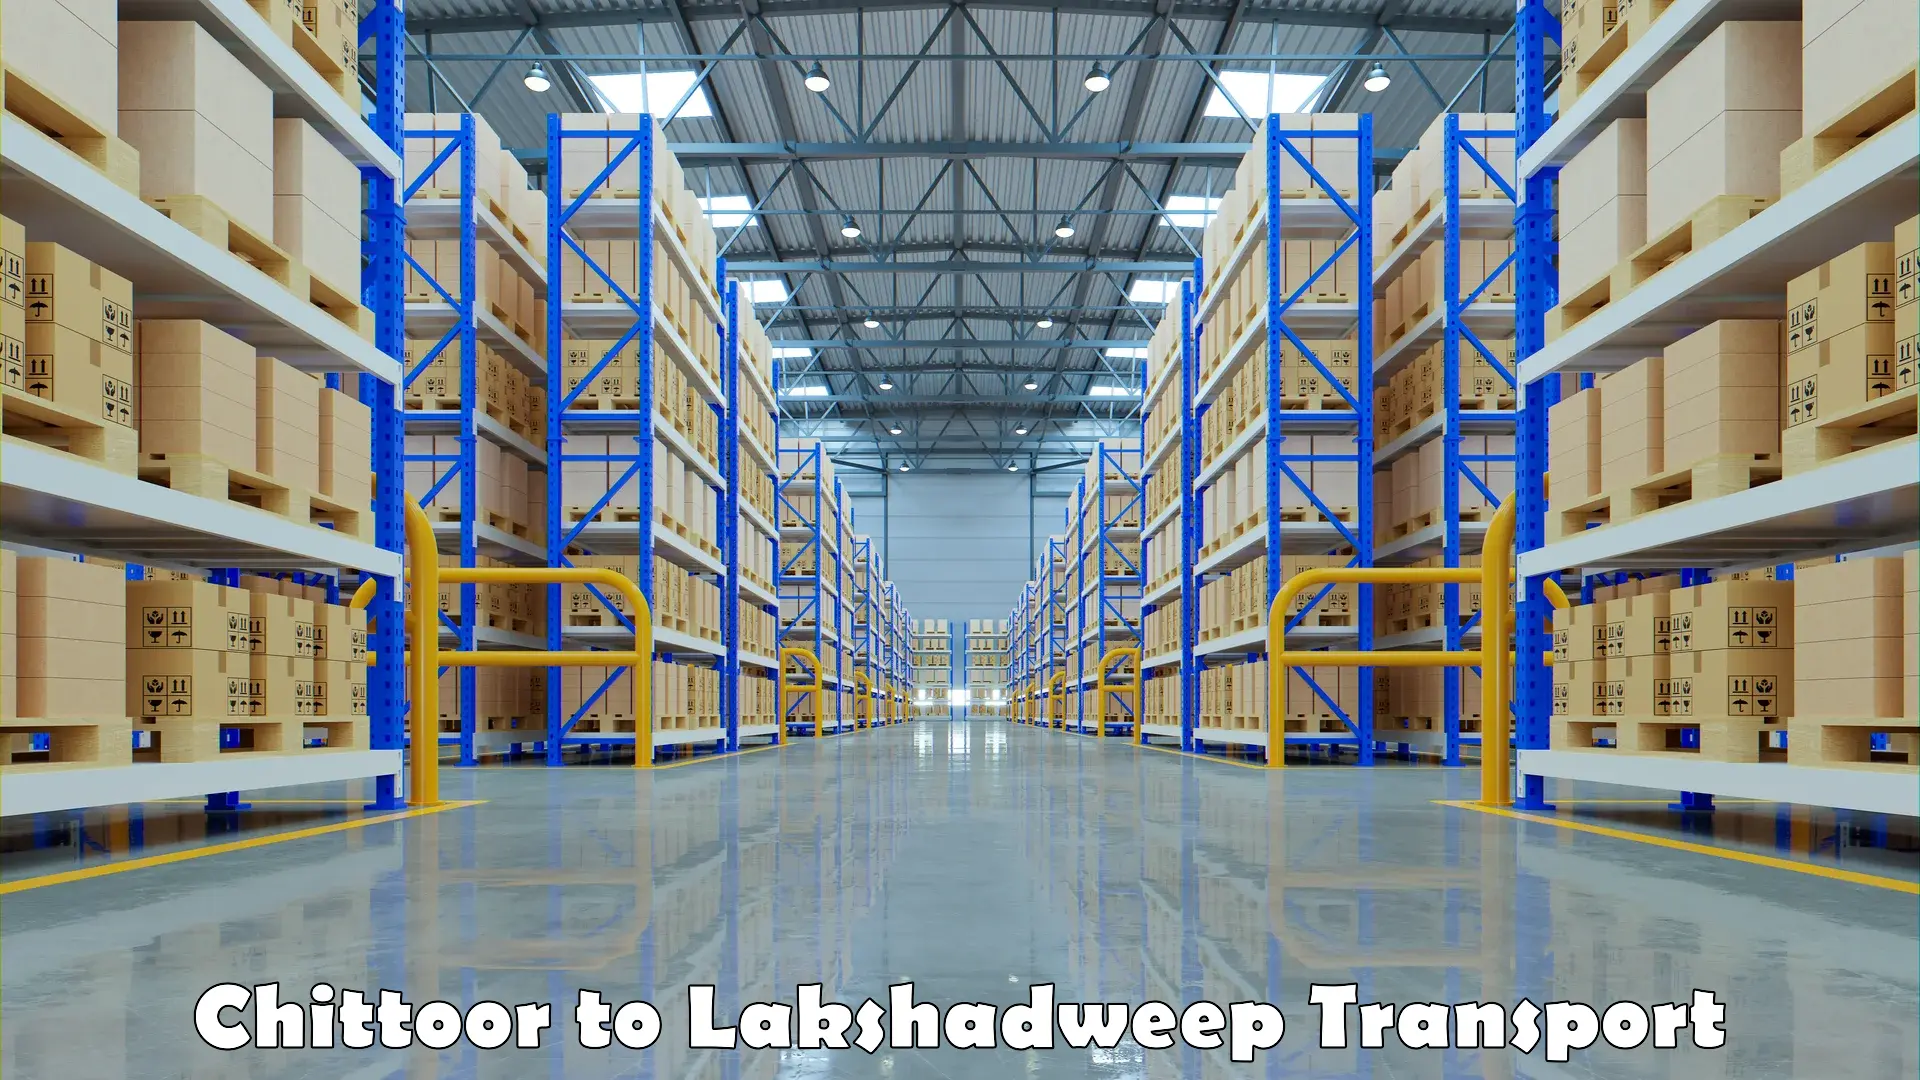 Daily transport service Chittoor to Lakshadweep